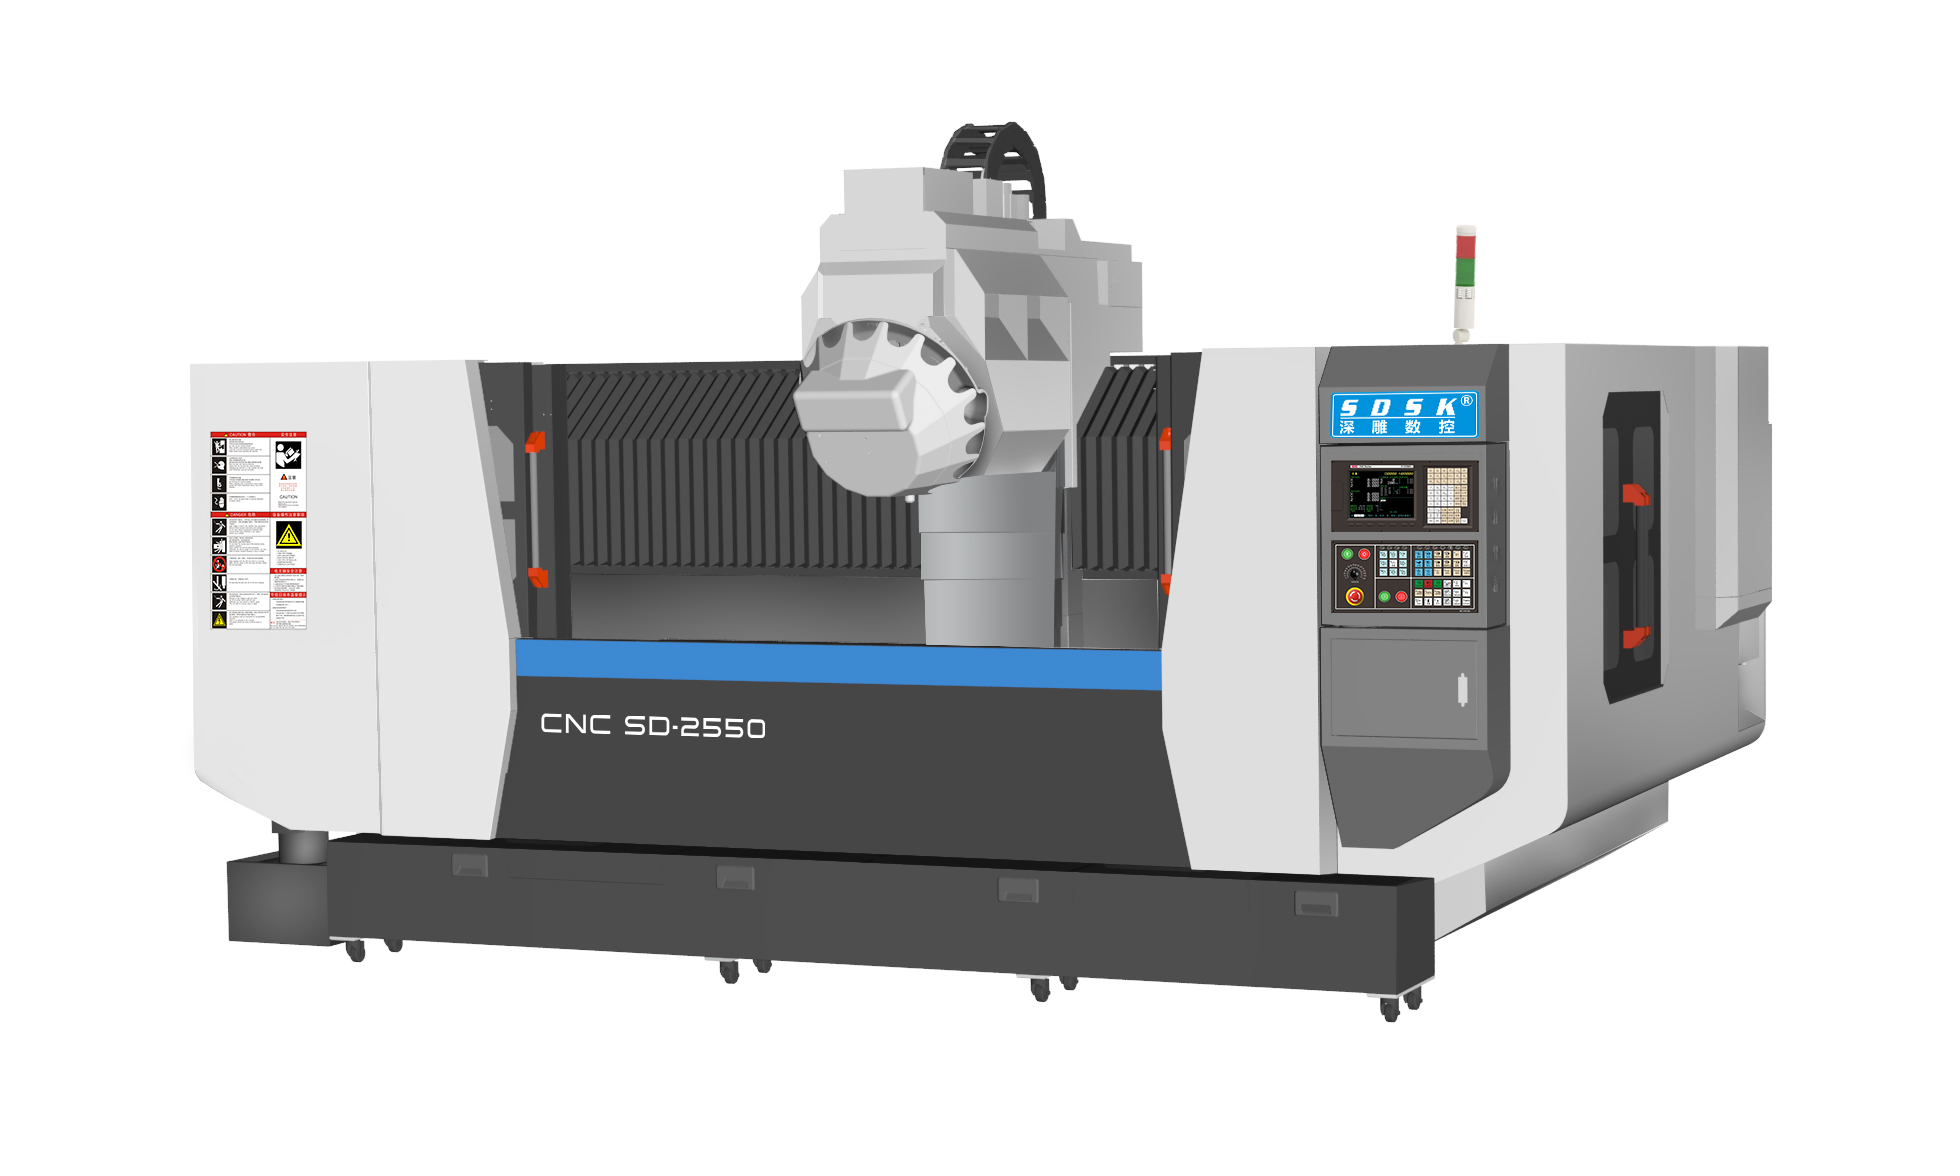 What is the difference between a double head precision carving machine and a CNC milling machine